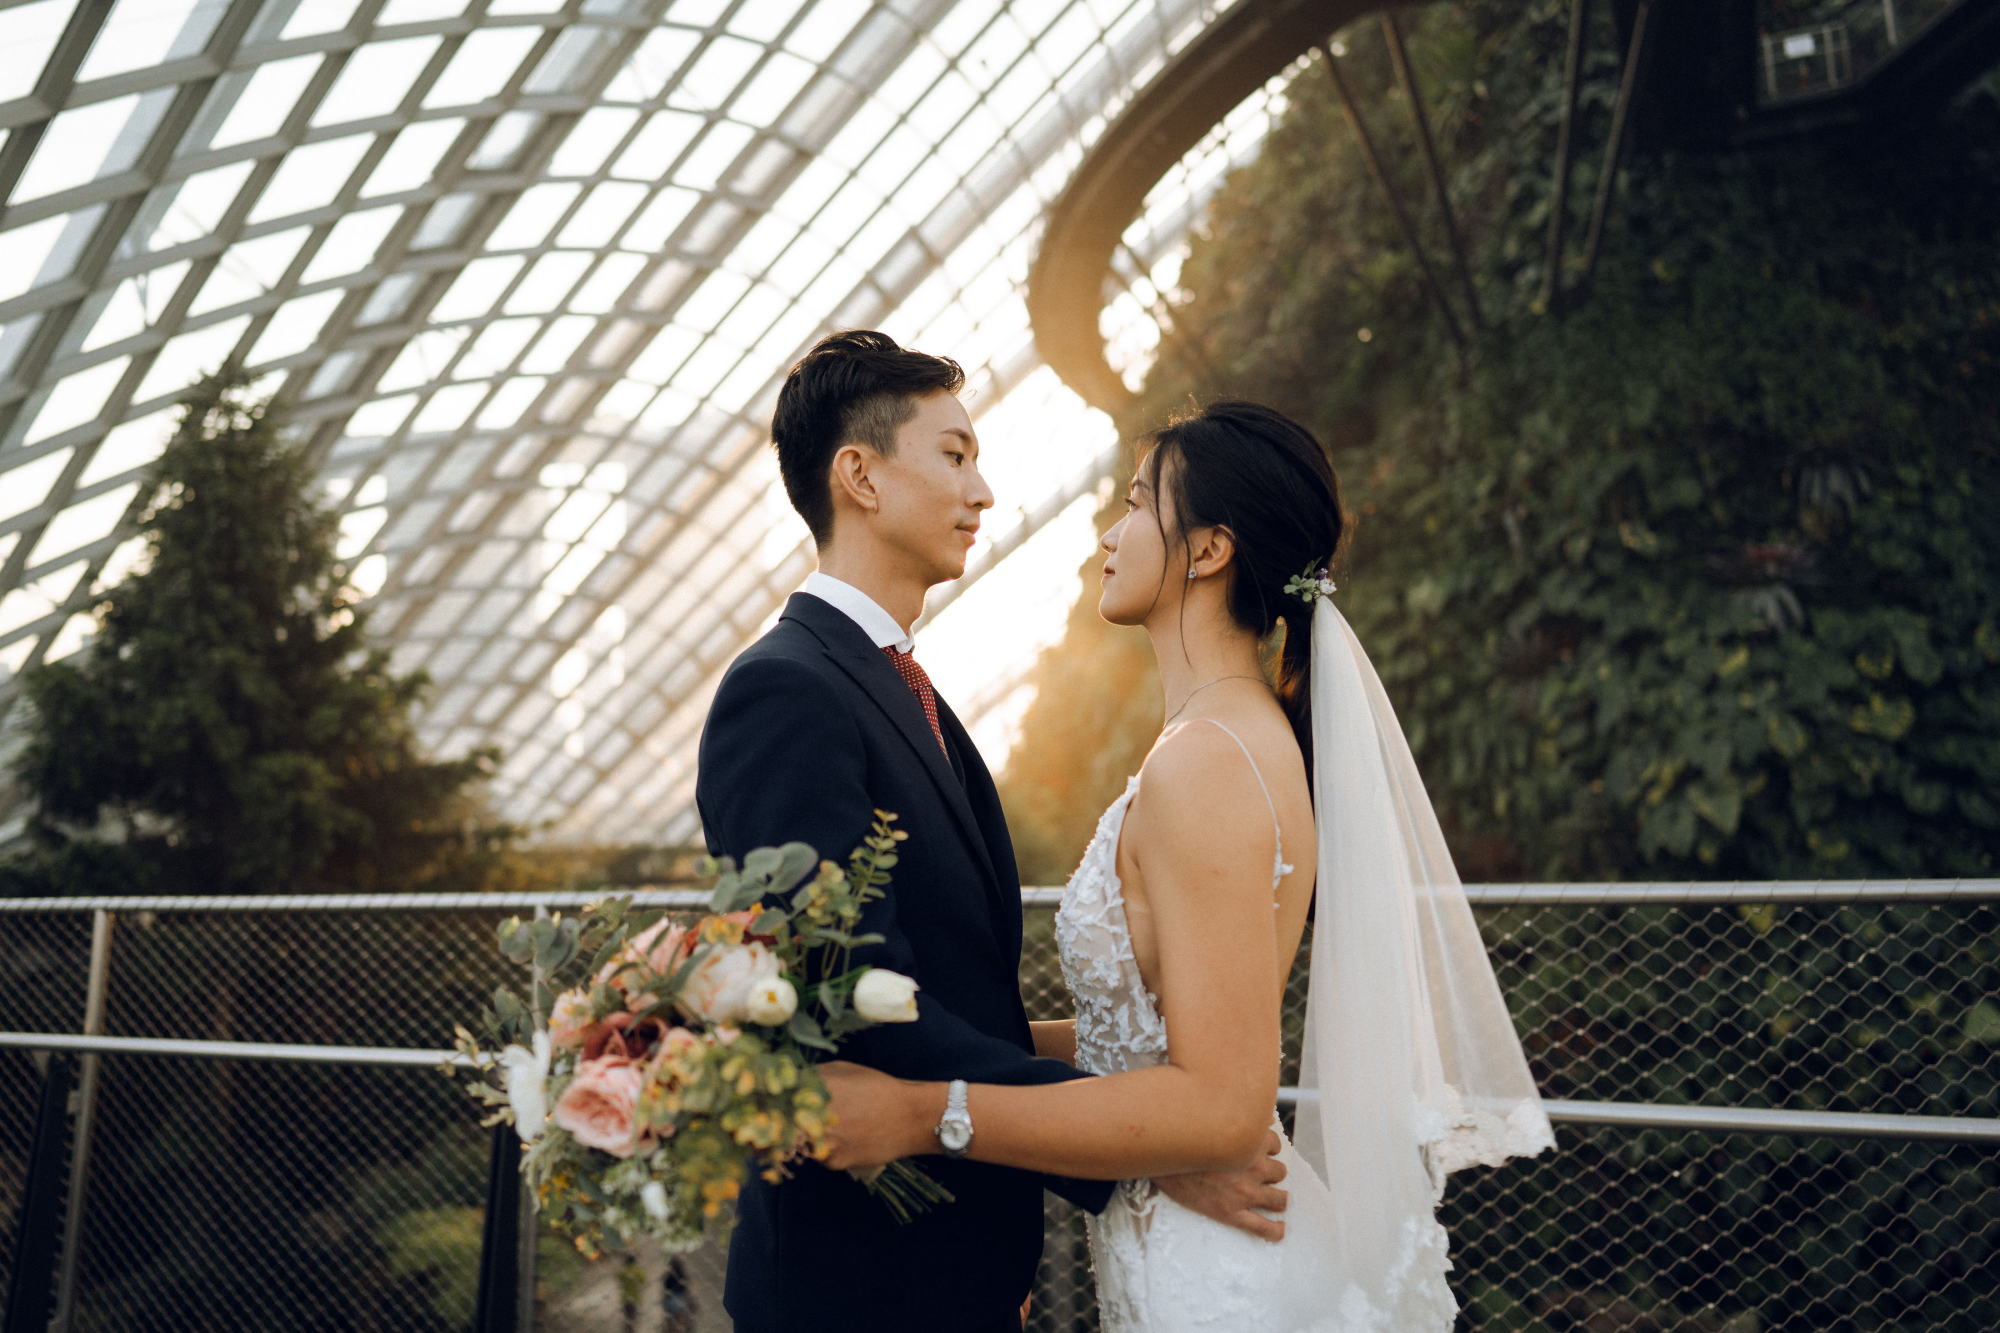 Sunset Prewedding Photoshoot At Cloud Forest, Gardens By The Bay  by Samantha on OneThreeOneFour 27